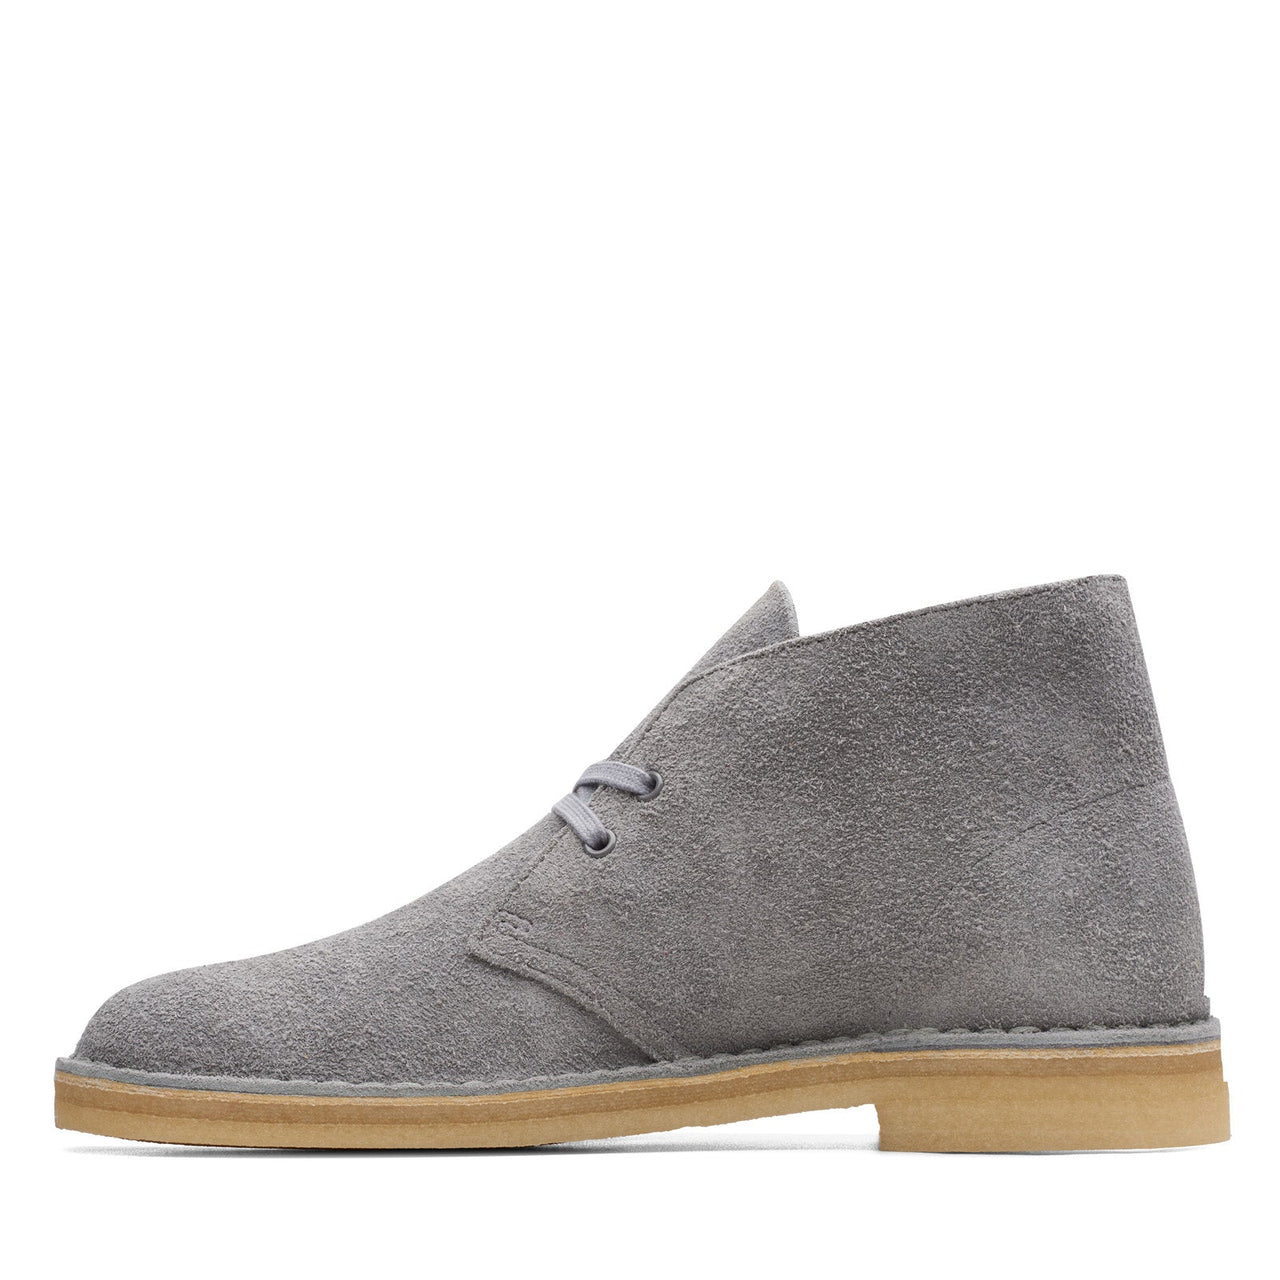 Clarks Desert Boot 26169941 Mens Gray Suede Lace Up Chukkas Boots